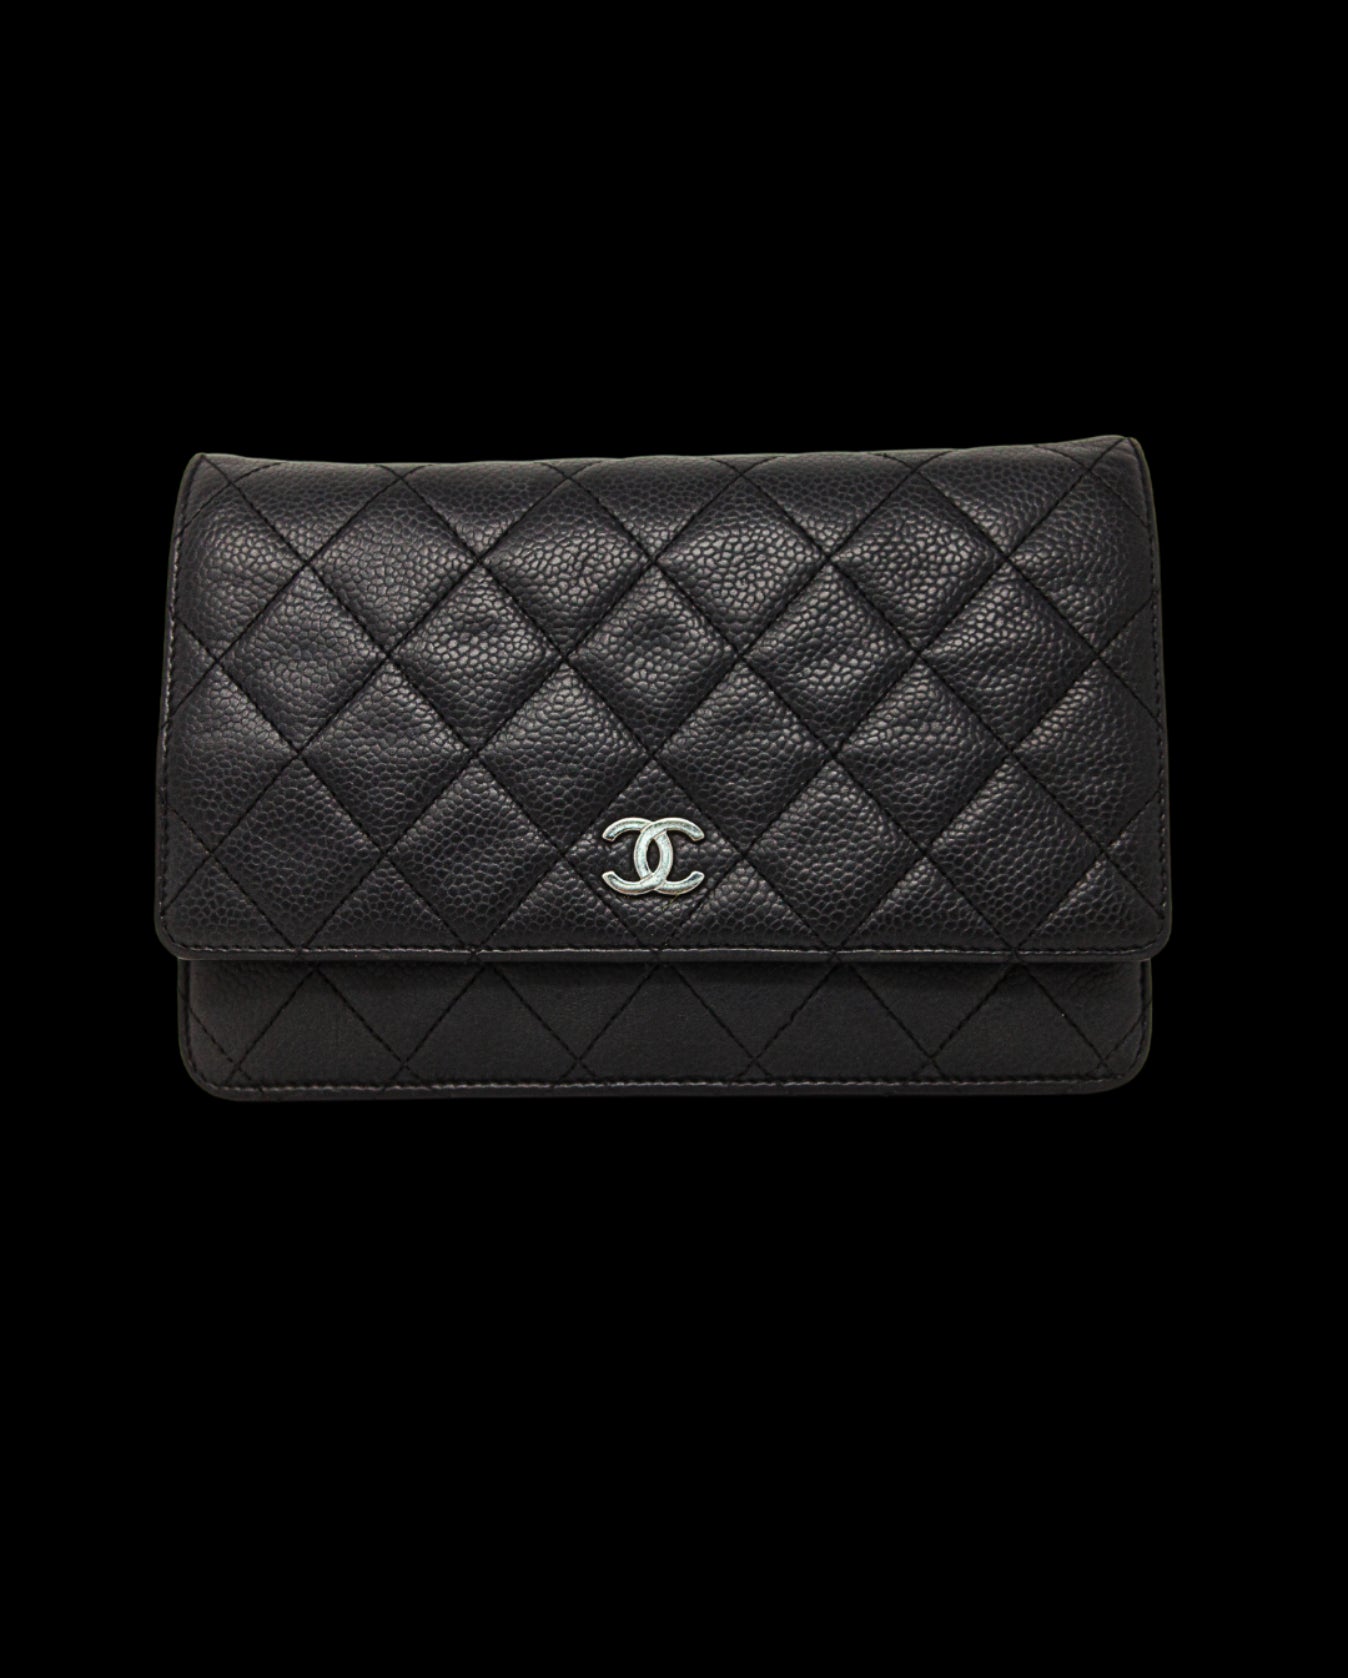 Chanel White Caviar Leather Half Moon Wallet On Chain Chanel